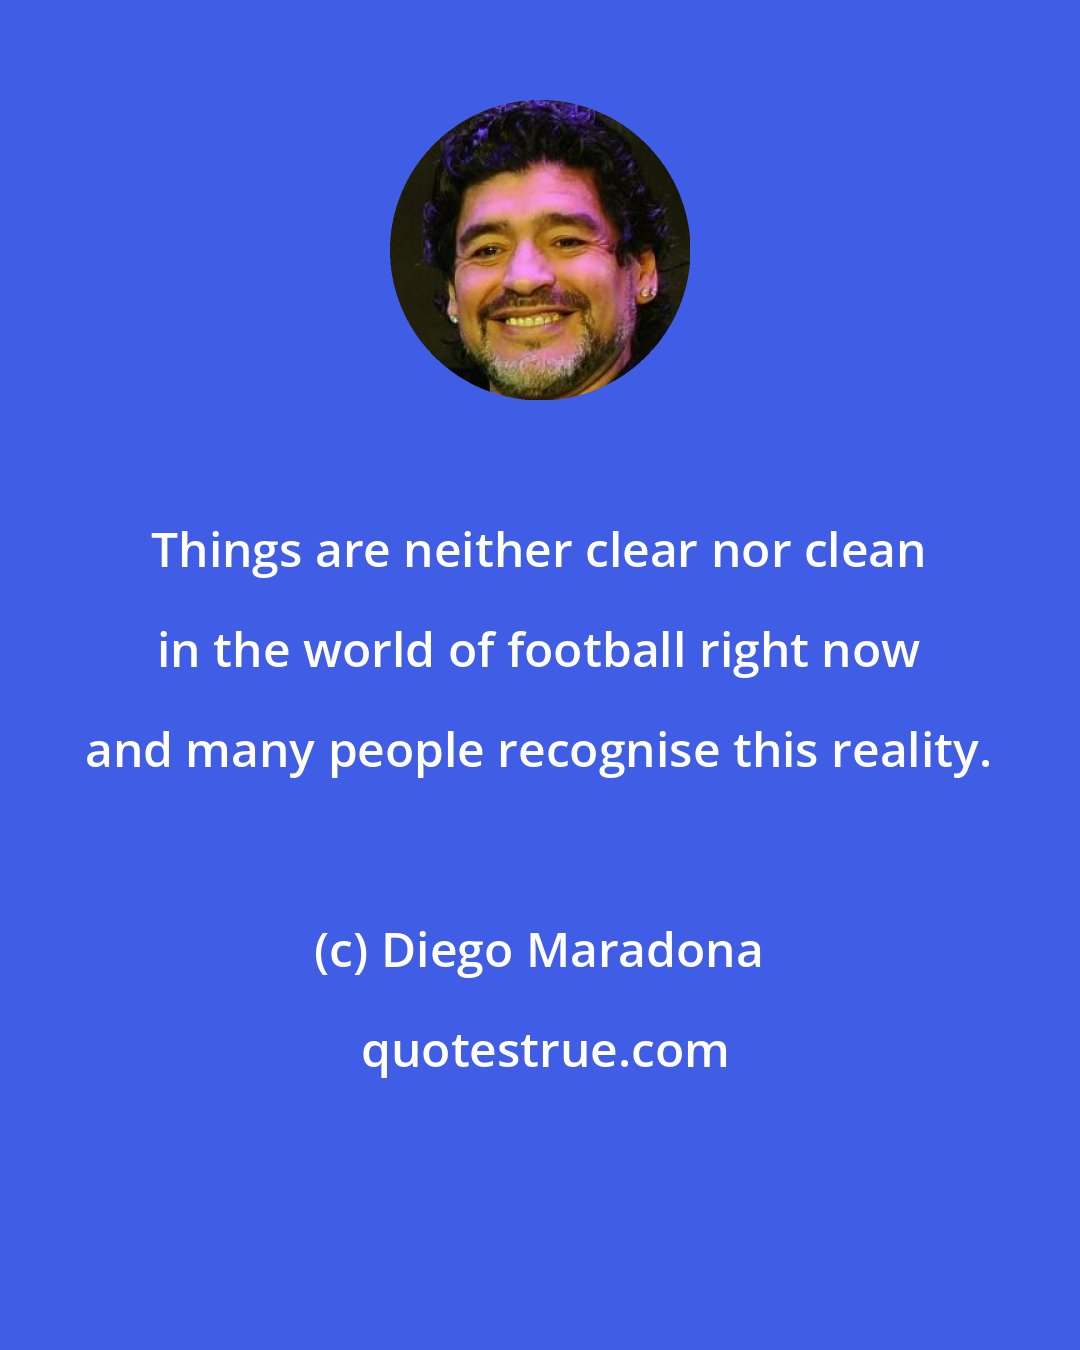 Diego Maradona: Things are neither clear nor clean in the world of football right now and many people recognise this reality.